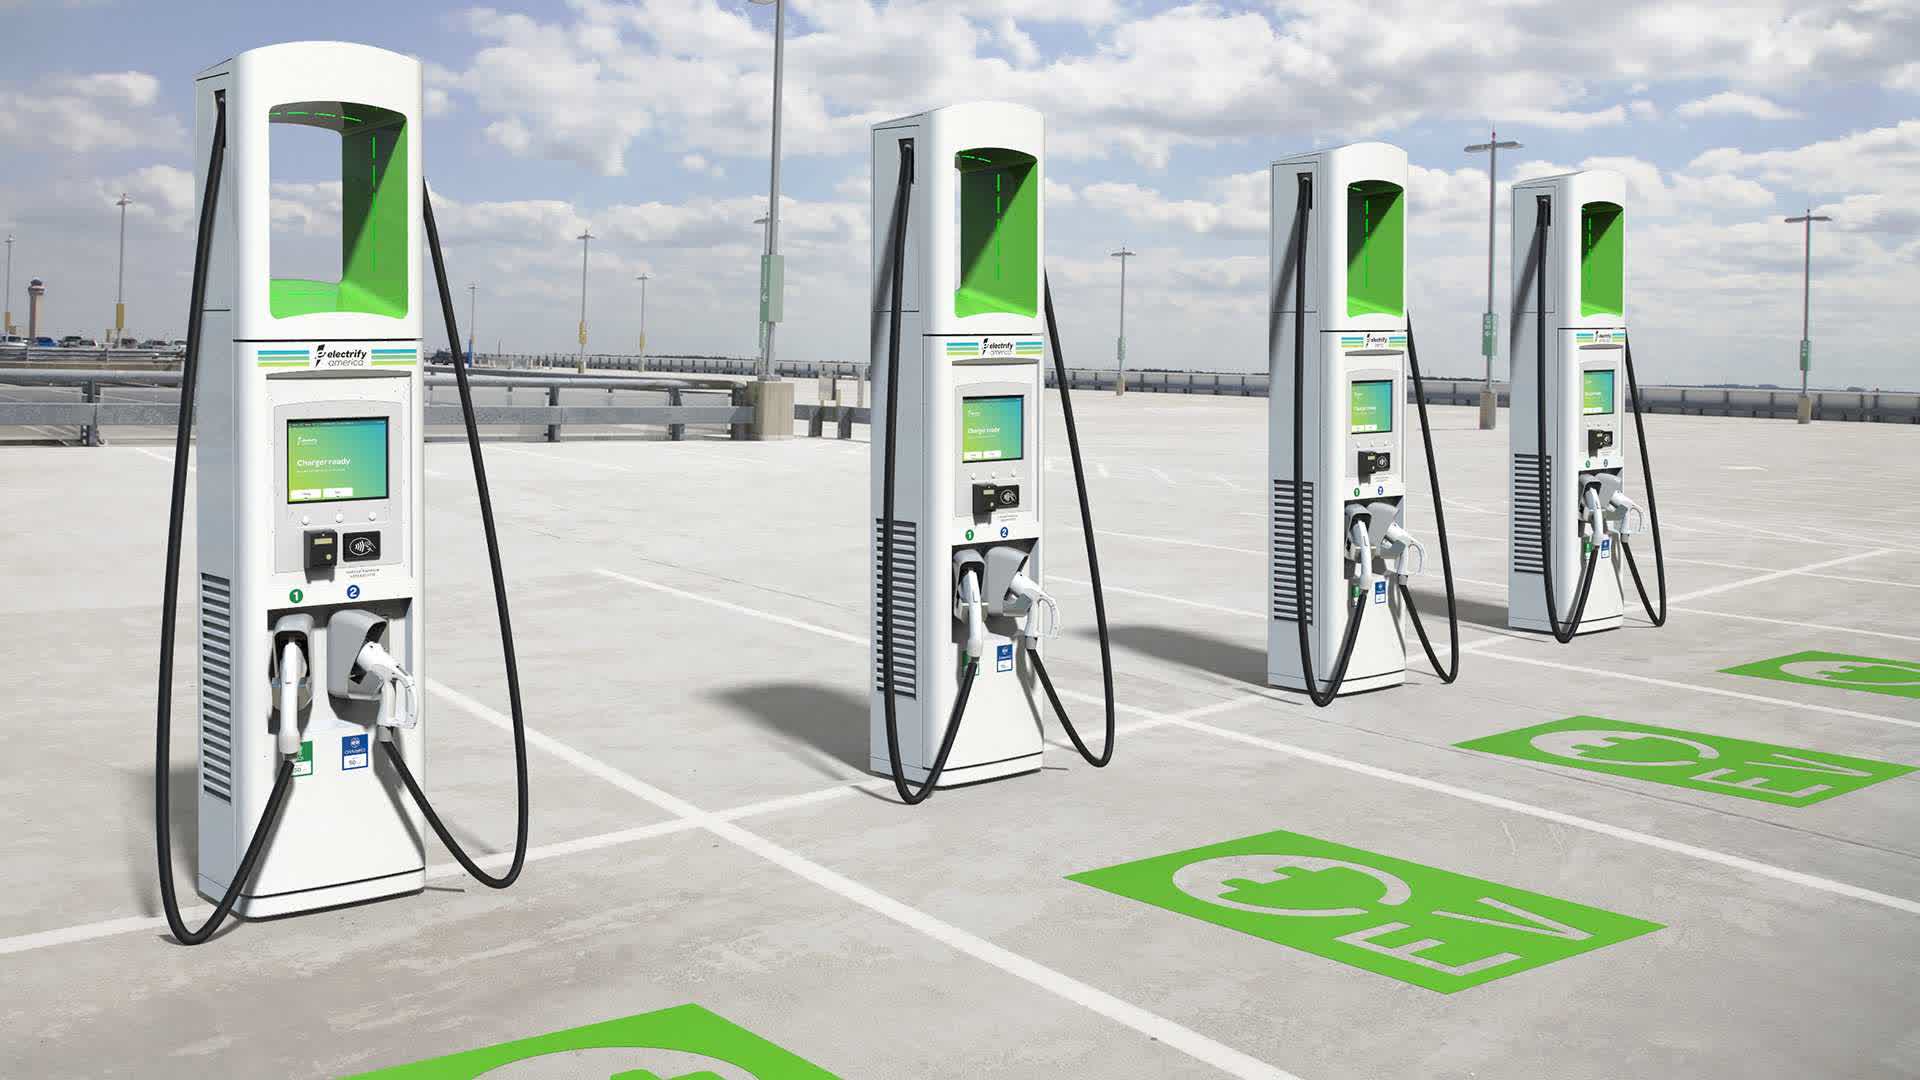 Electrify America's Boost Plan will 'more than double' its EV charging network's footprint by 2026